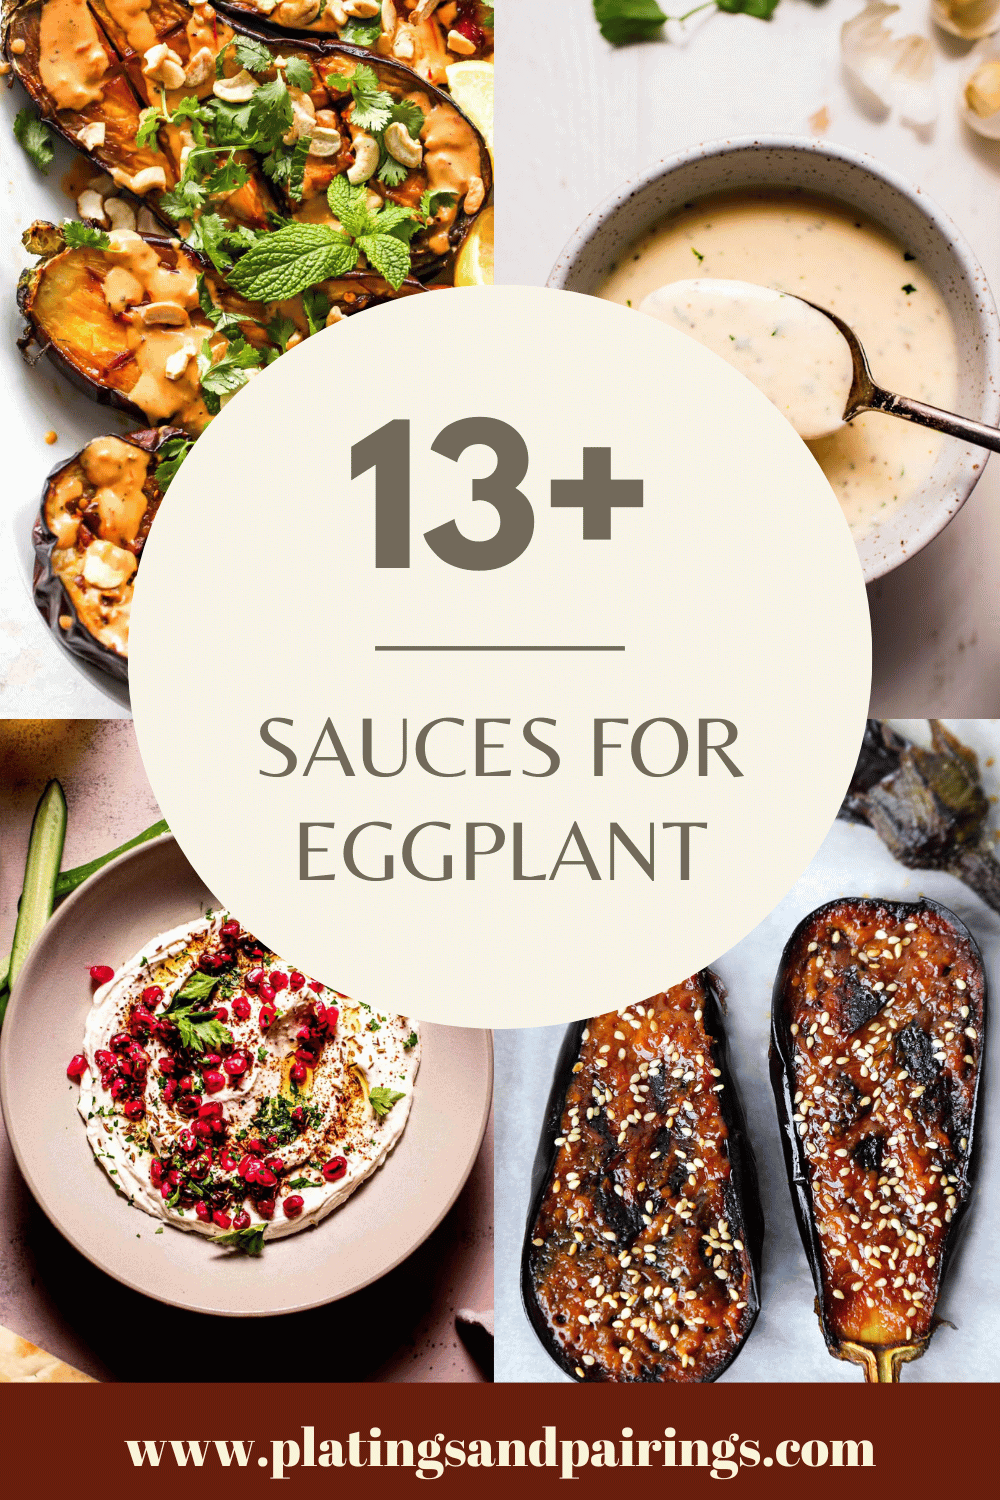 Collage of sauces for eggplant with text overlay.